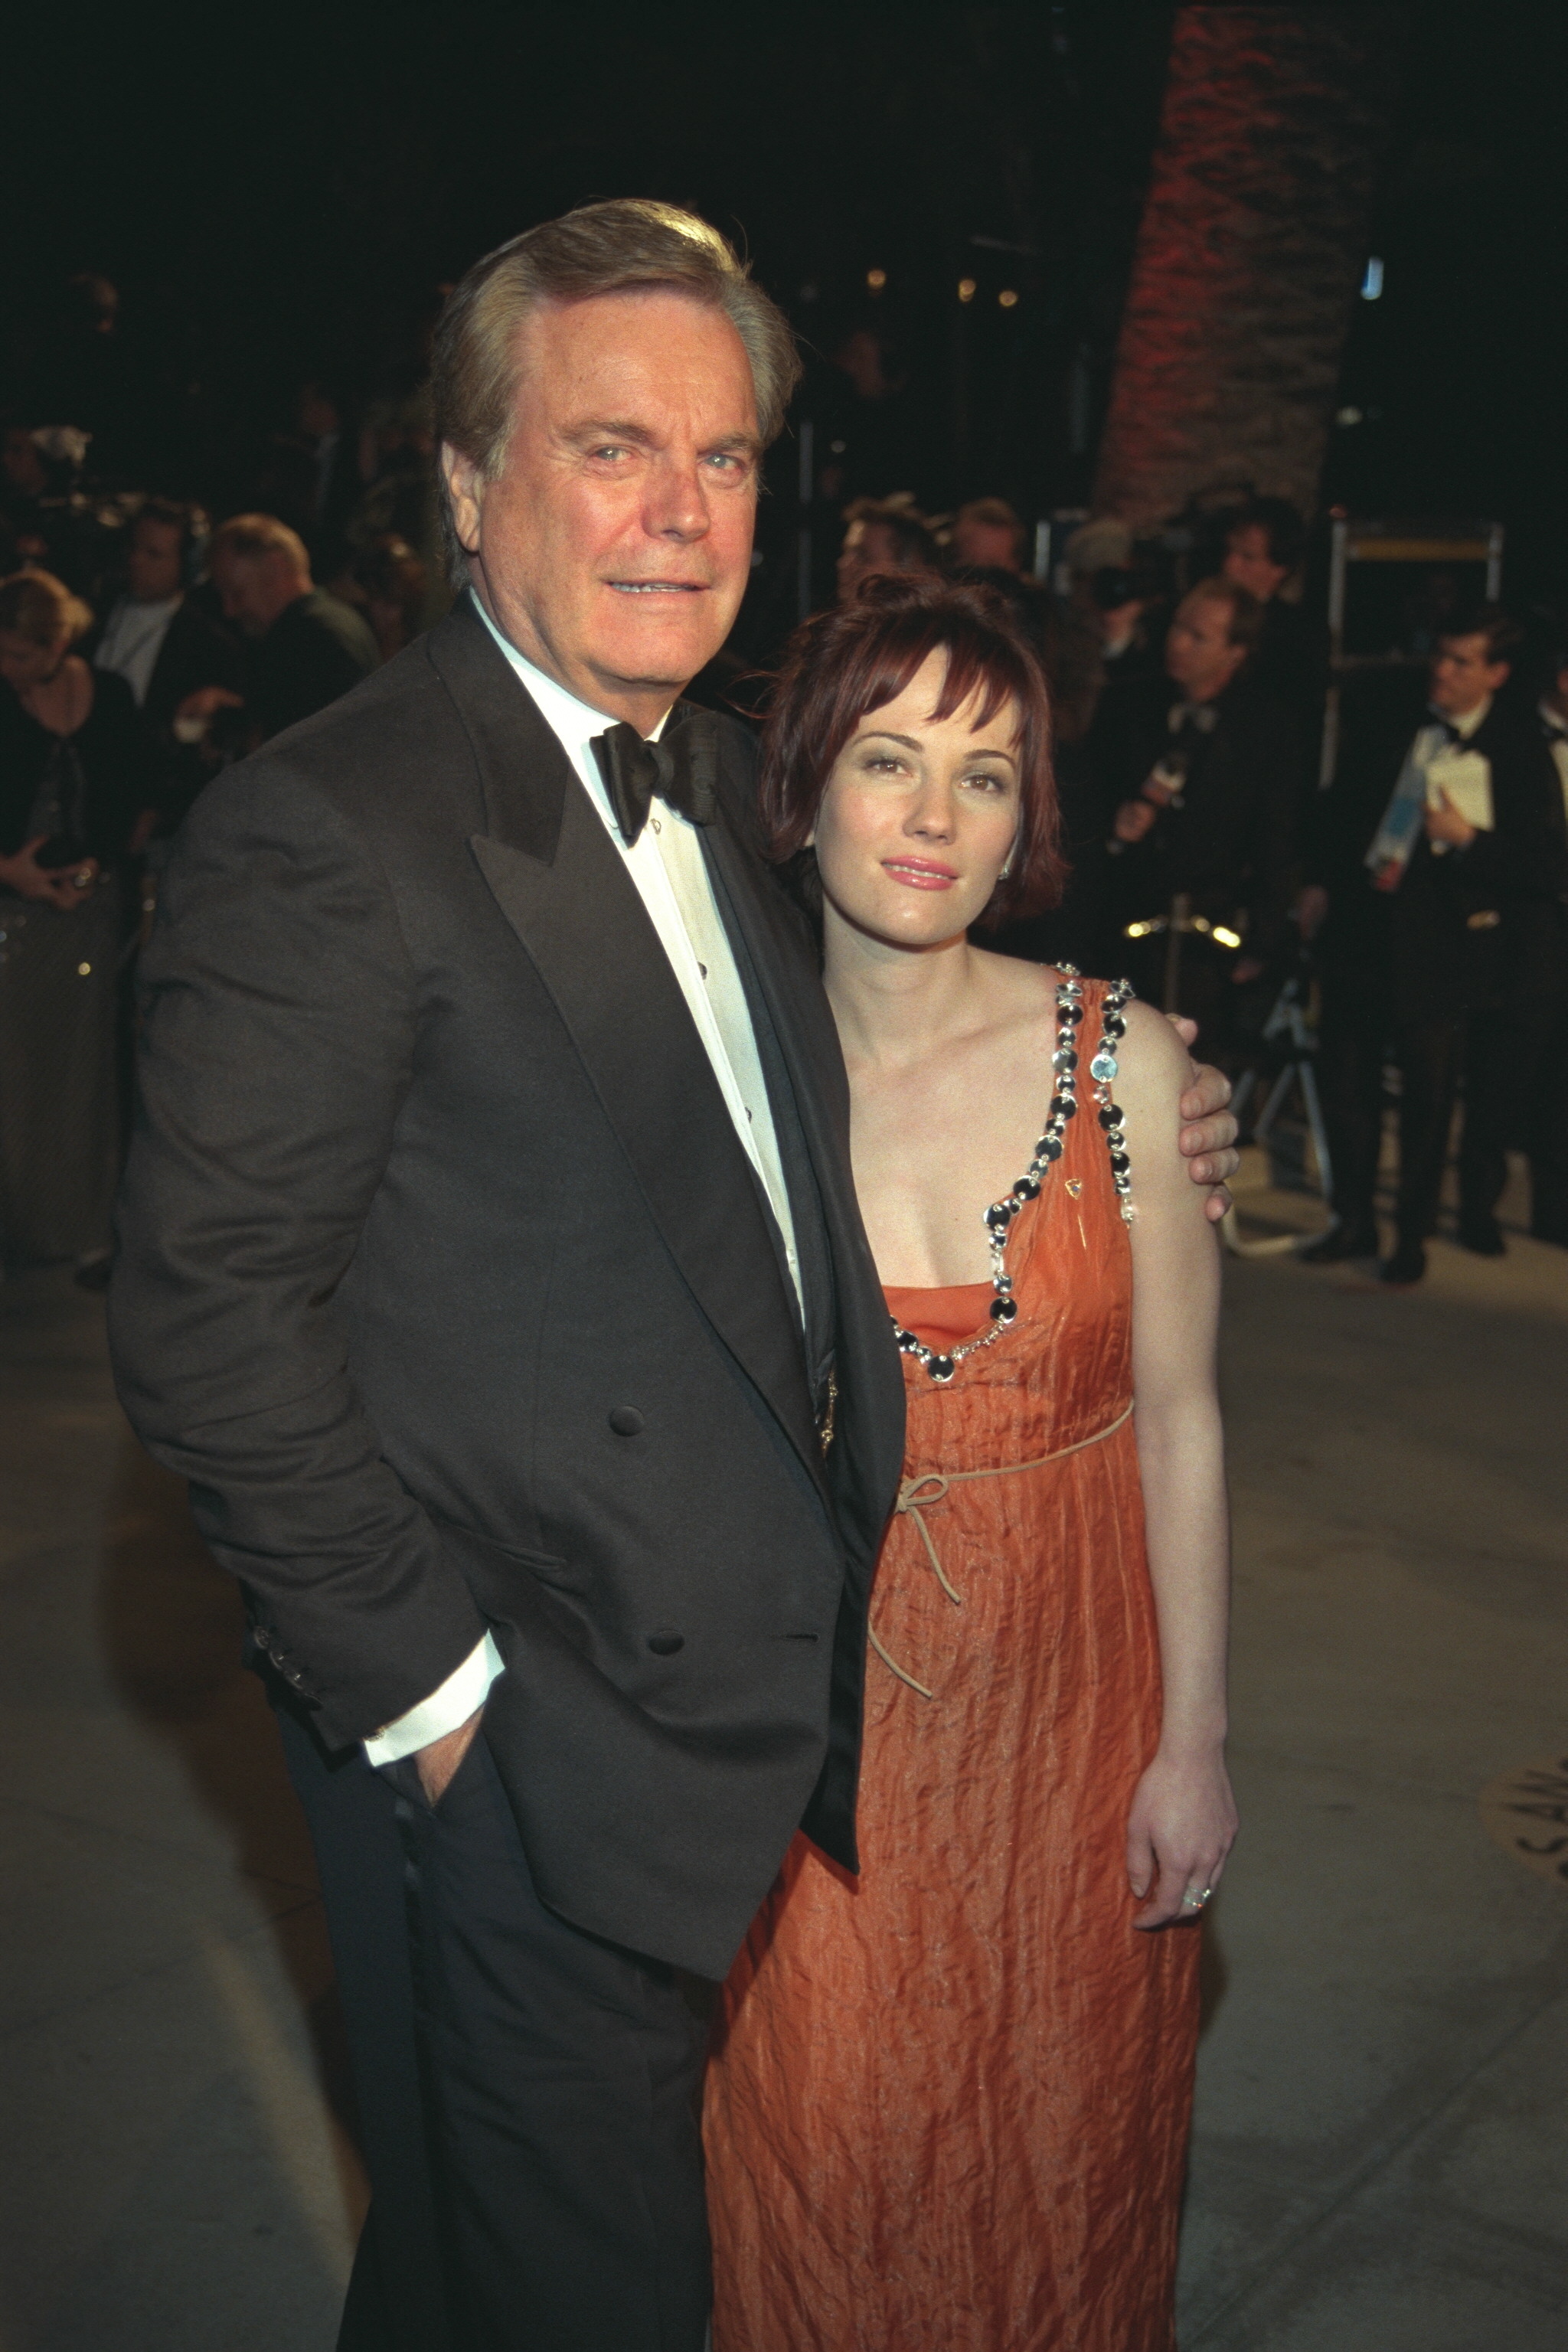 Robert Wagner with his daughter Natasha Gregson at the Oscars in 1999 | Source: Getty Images